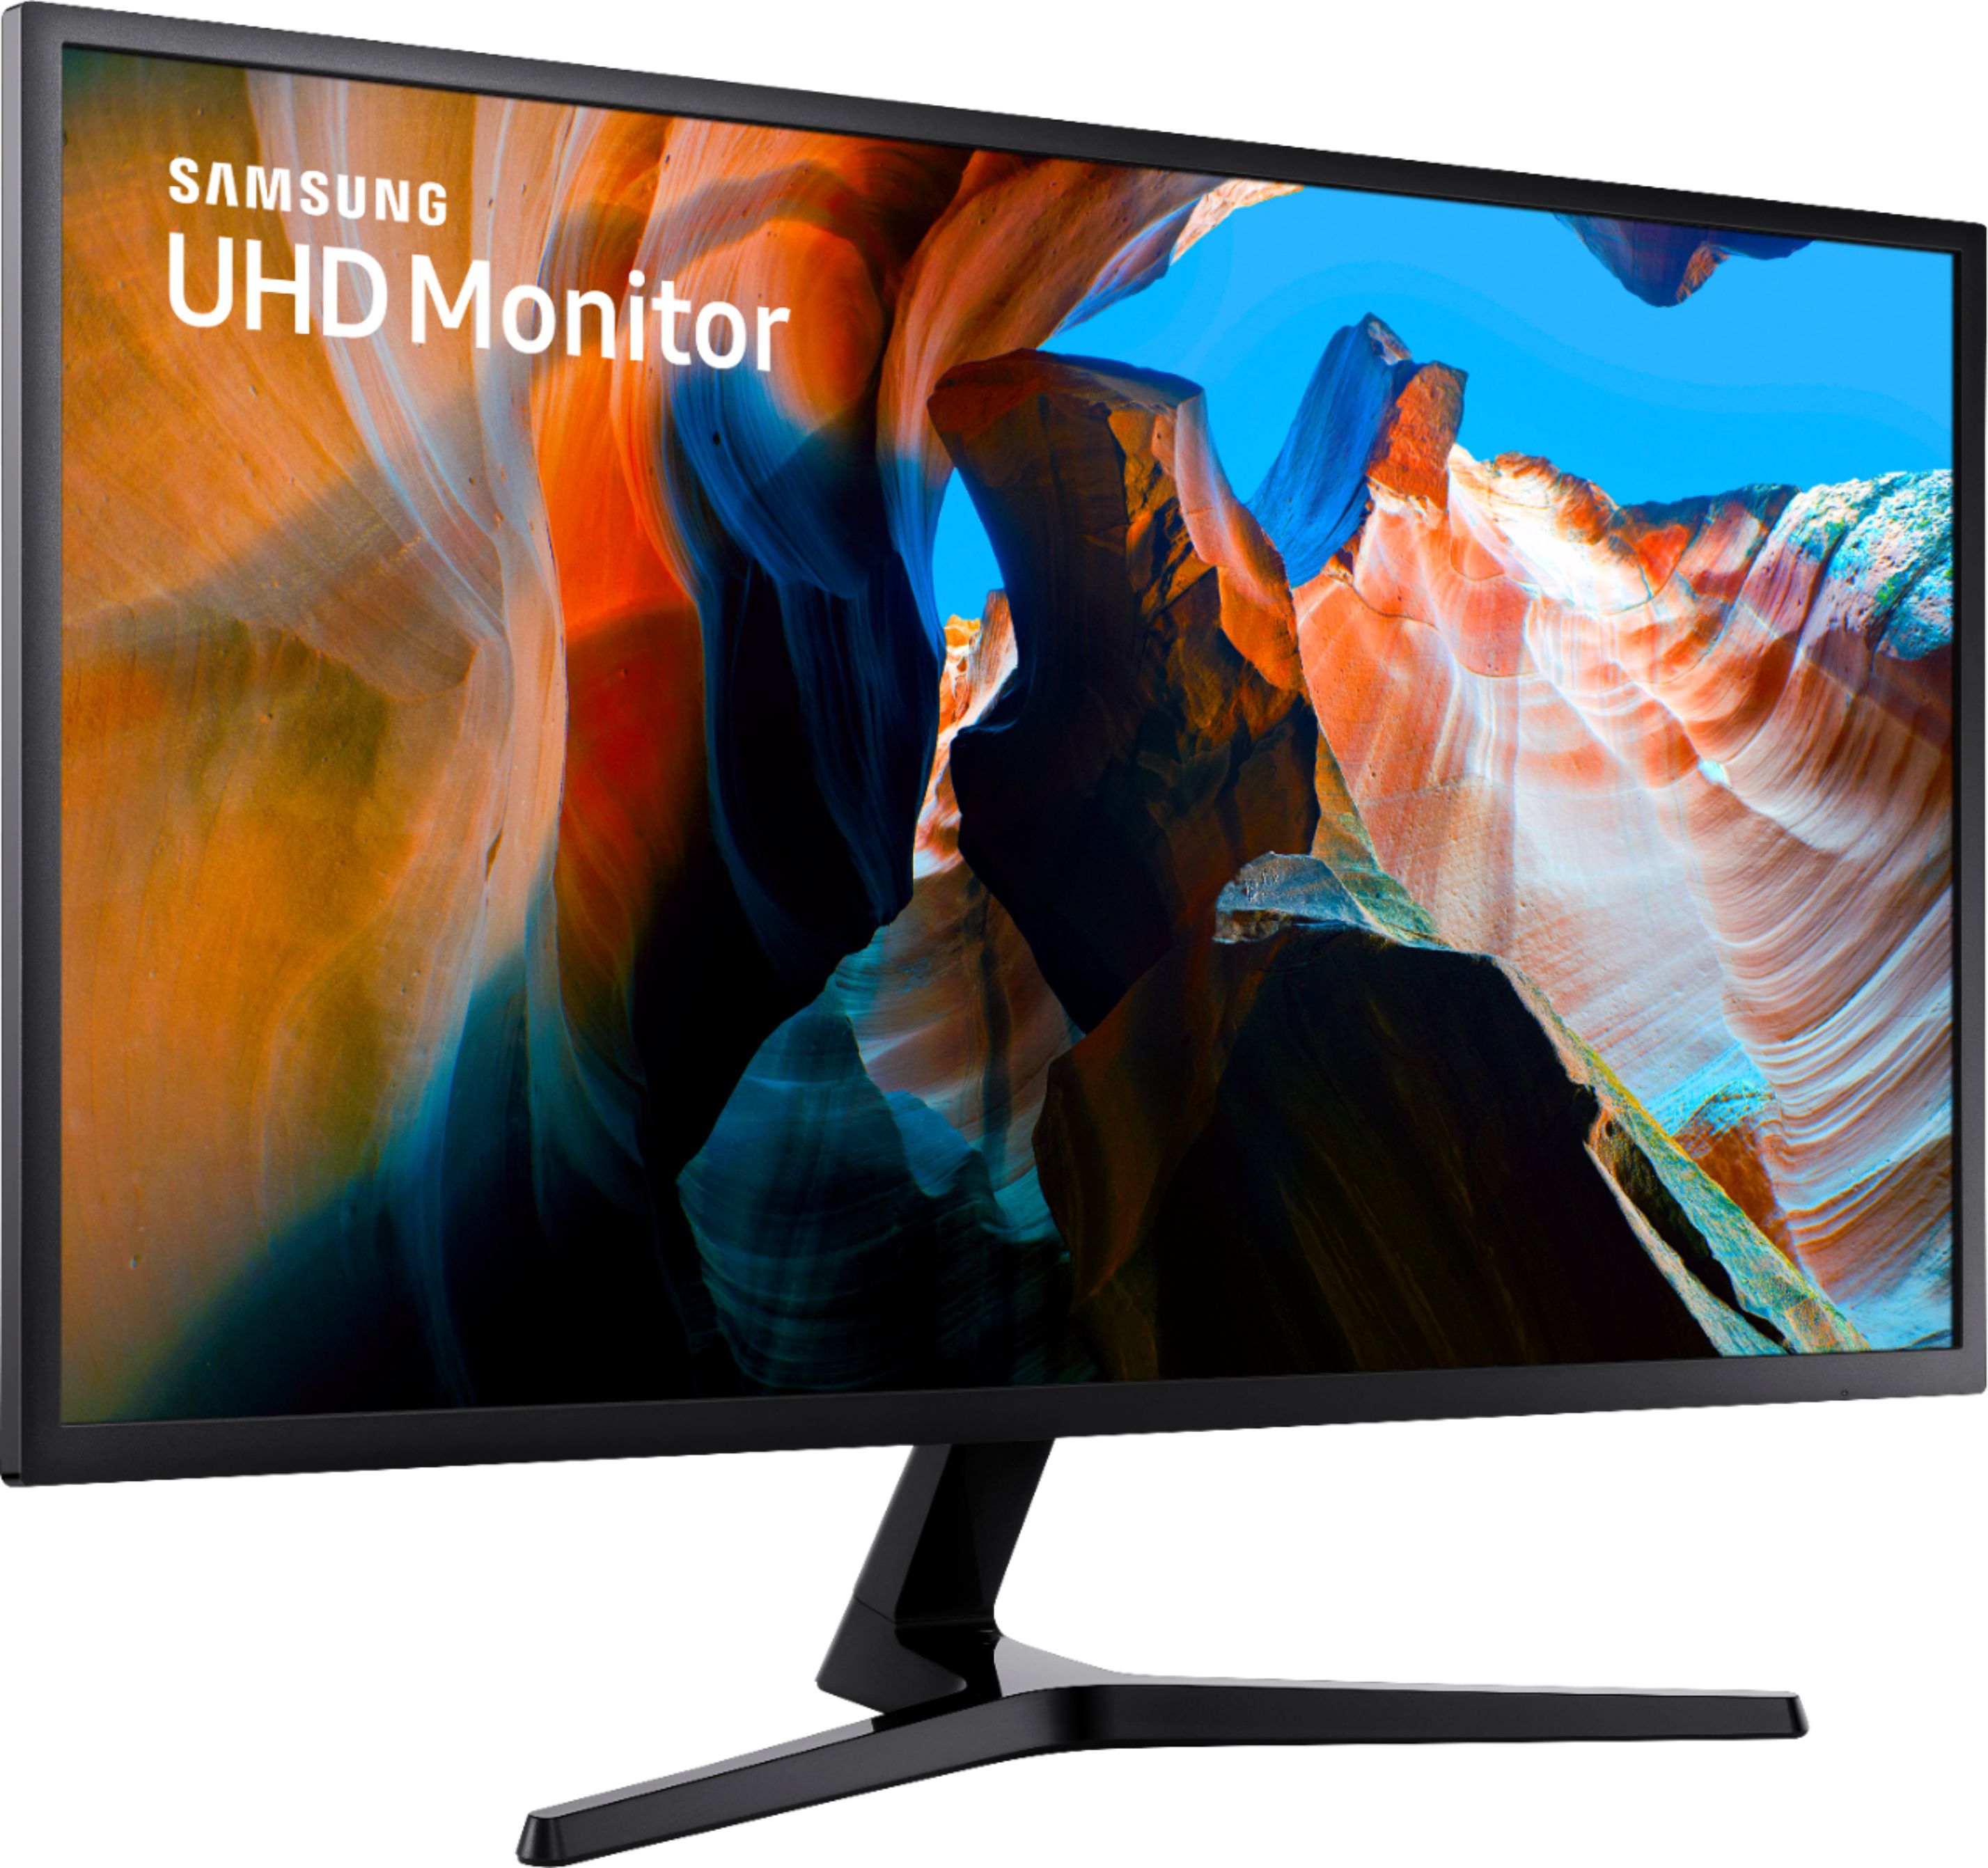 Angle View: Samsung - Geek Squad Certified Refurbished A800 Series 27" IPS LED 4K UHD Monitor with HDR - Black